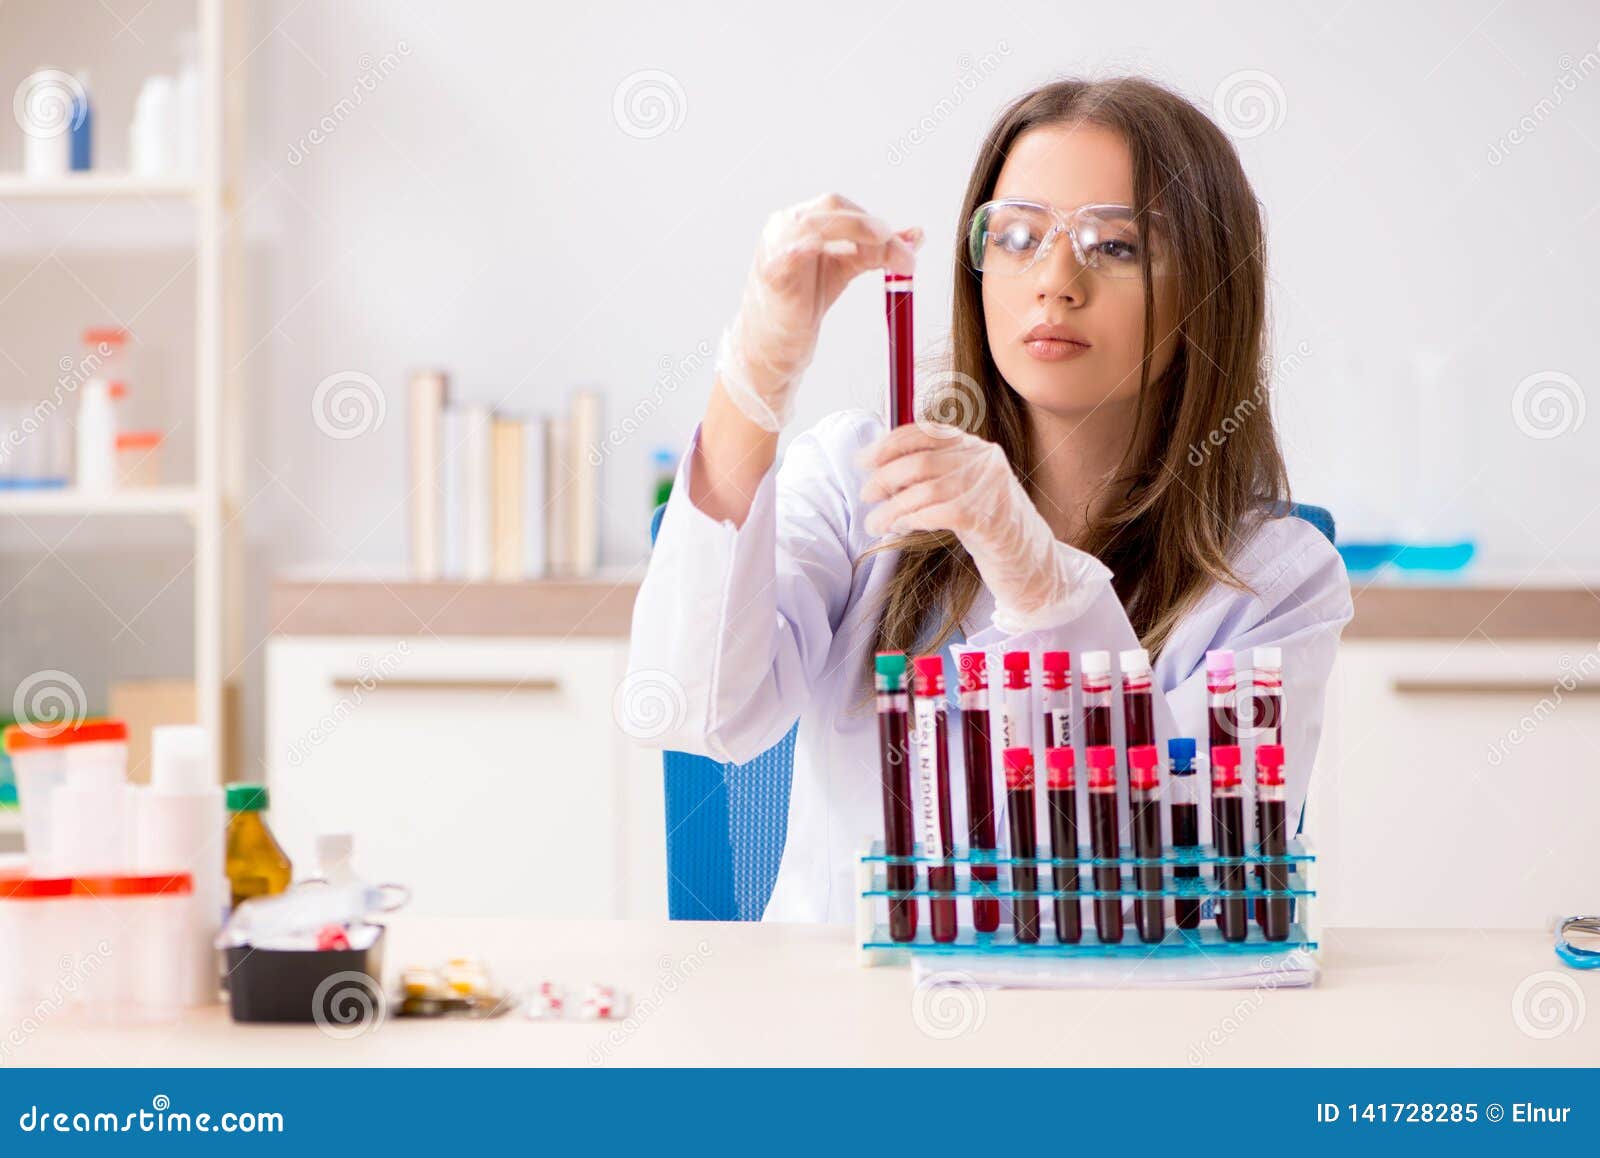 The Young Beautiful Lab Assistant Testing Blood Samples Stock Image ...